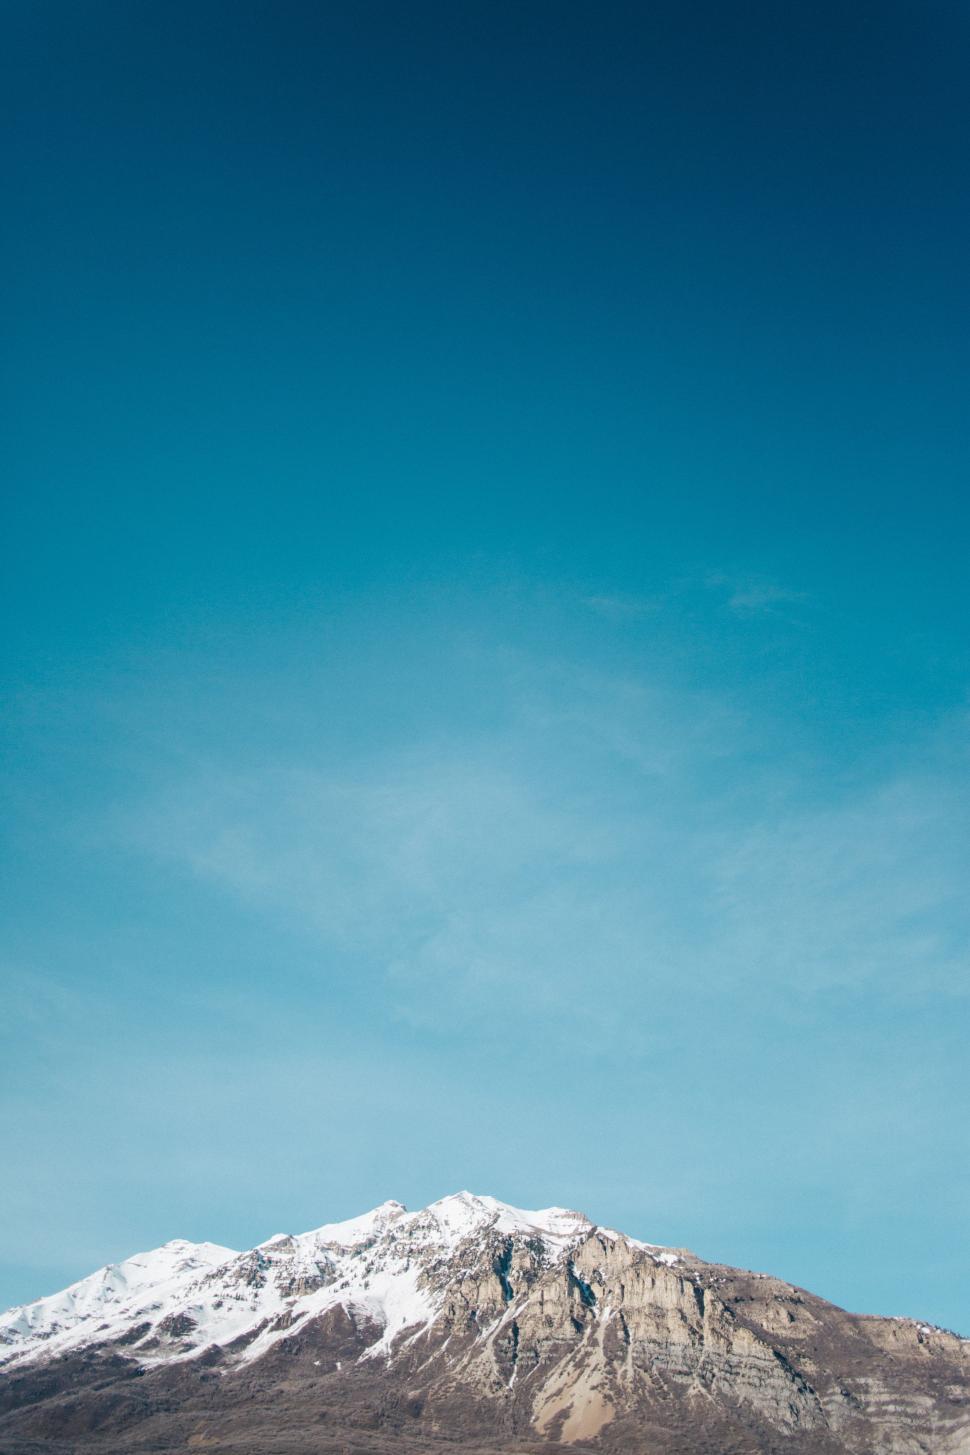 Free Image of Snow Covered Mountain Under Blue Sky 